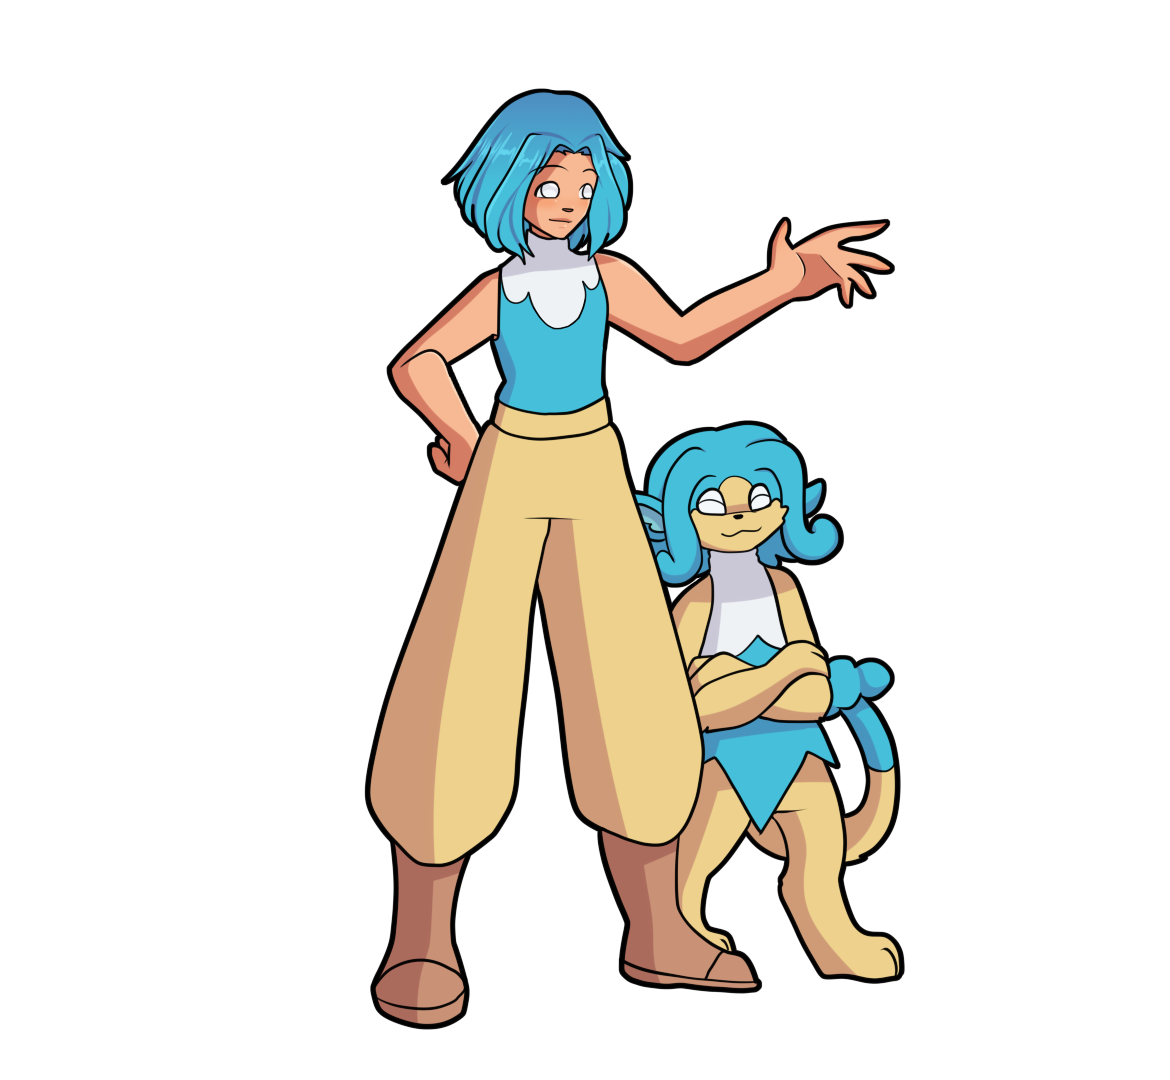 Trainer Violet and Toxel by Poisongale on DeviantArt